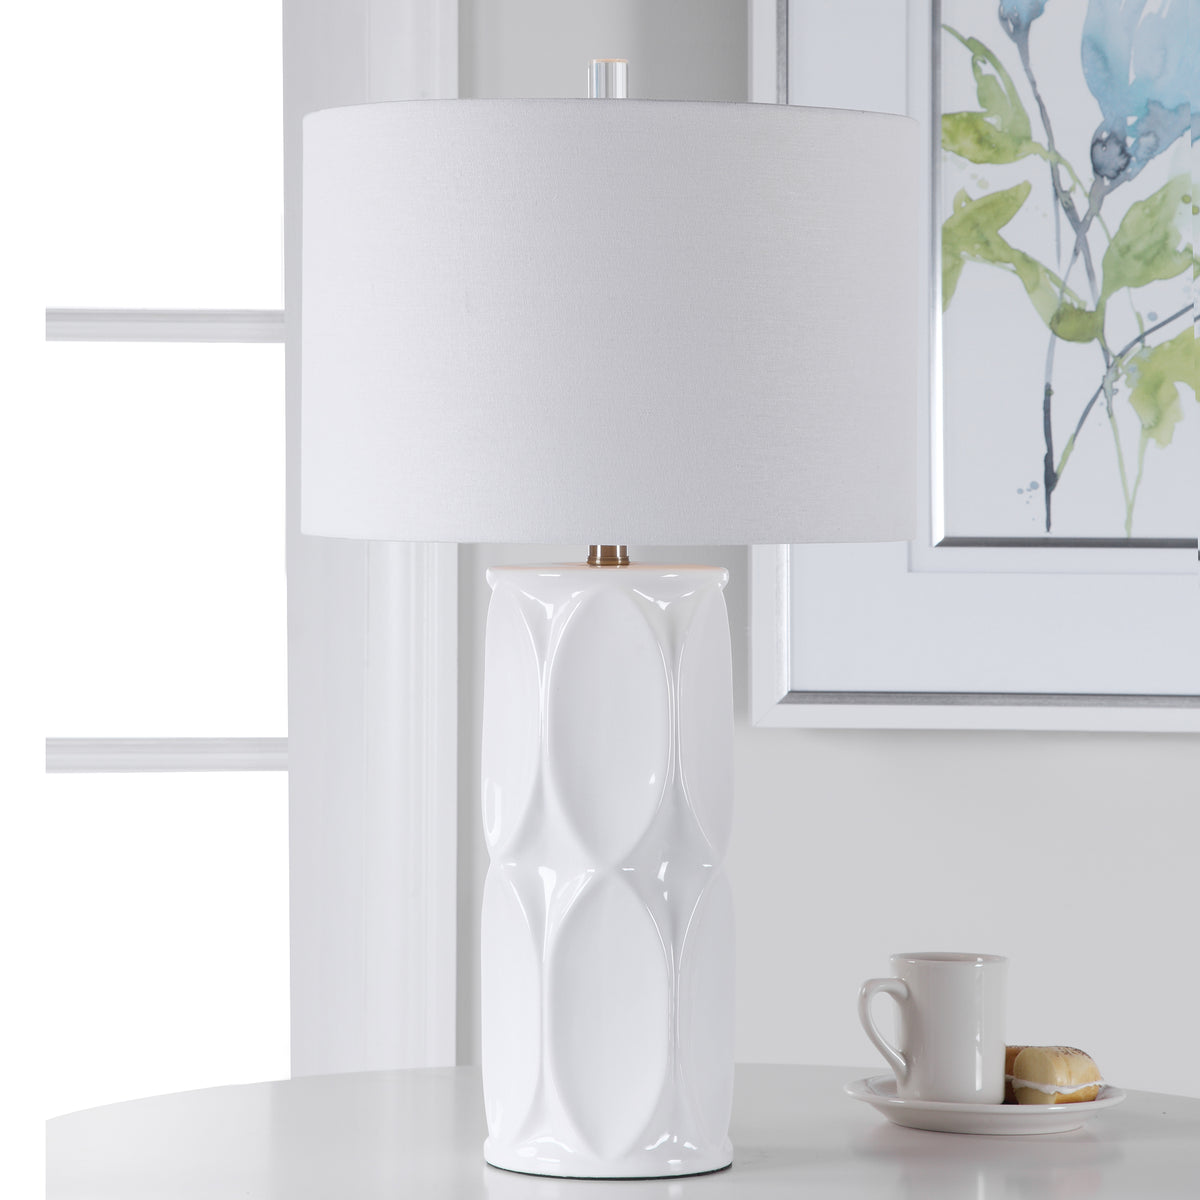 Uttermost Sinclair White Table Lamp